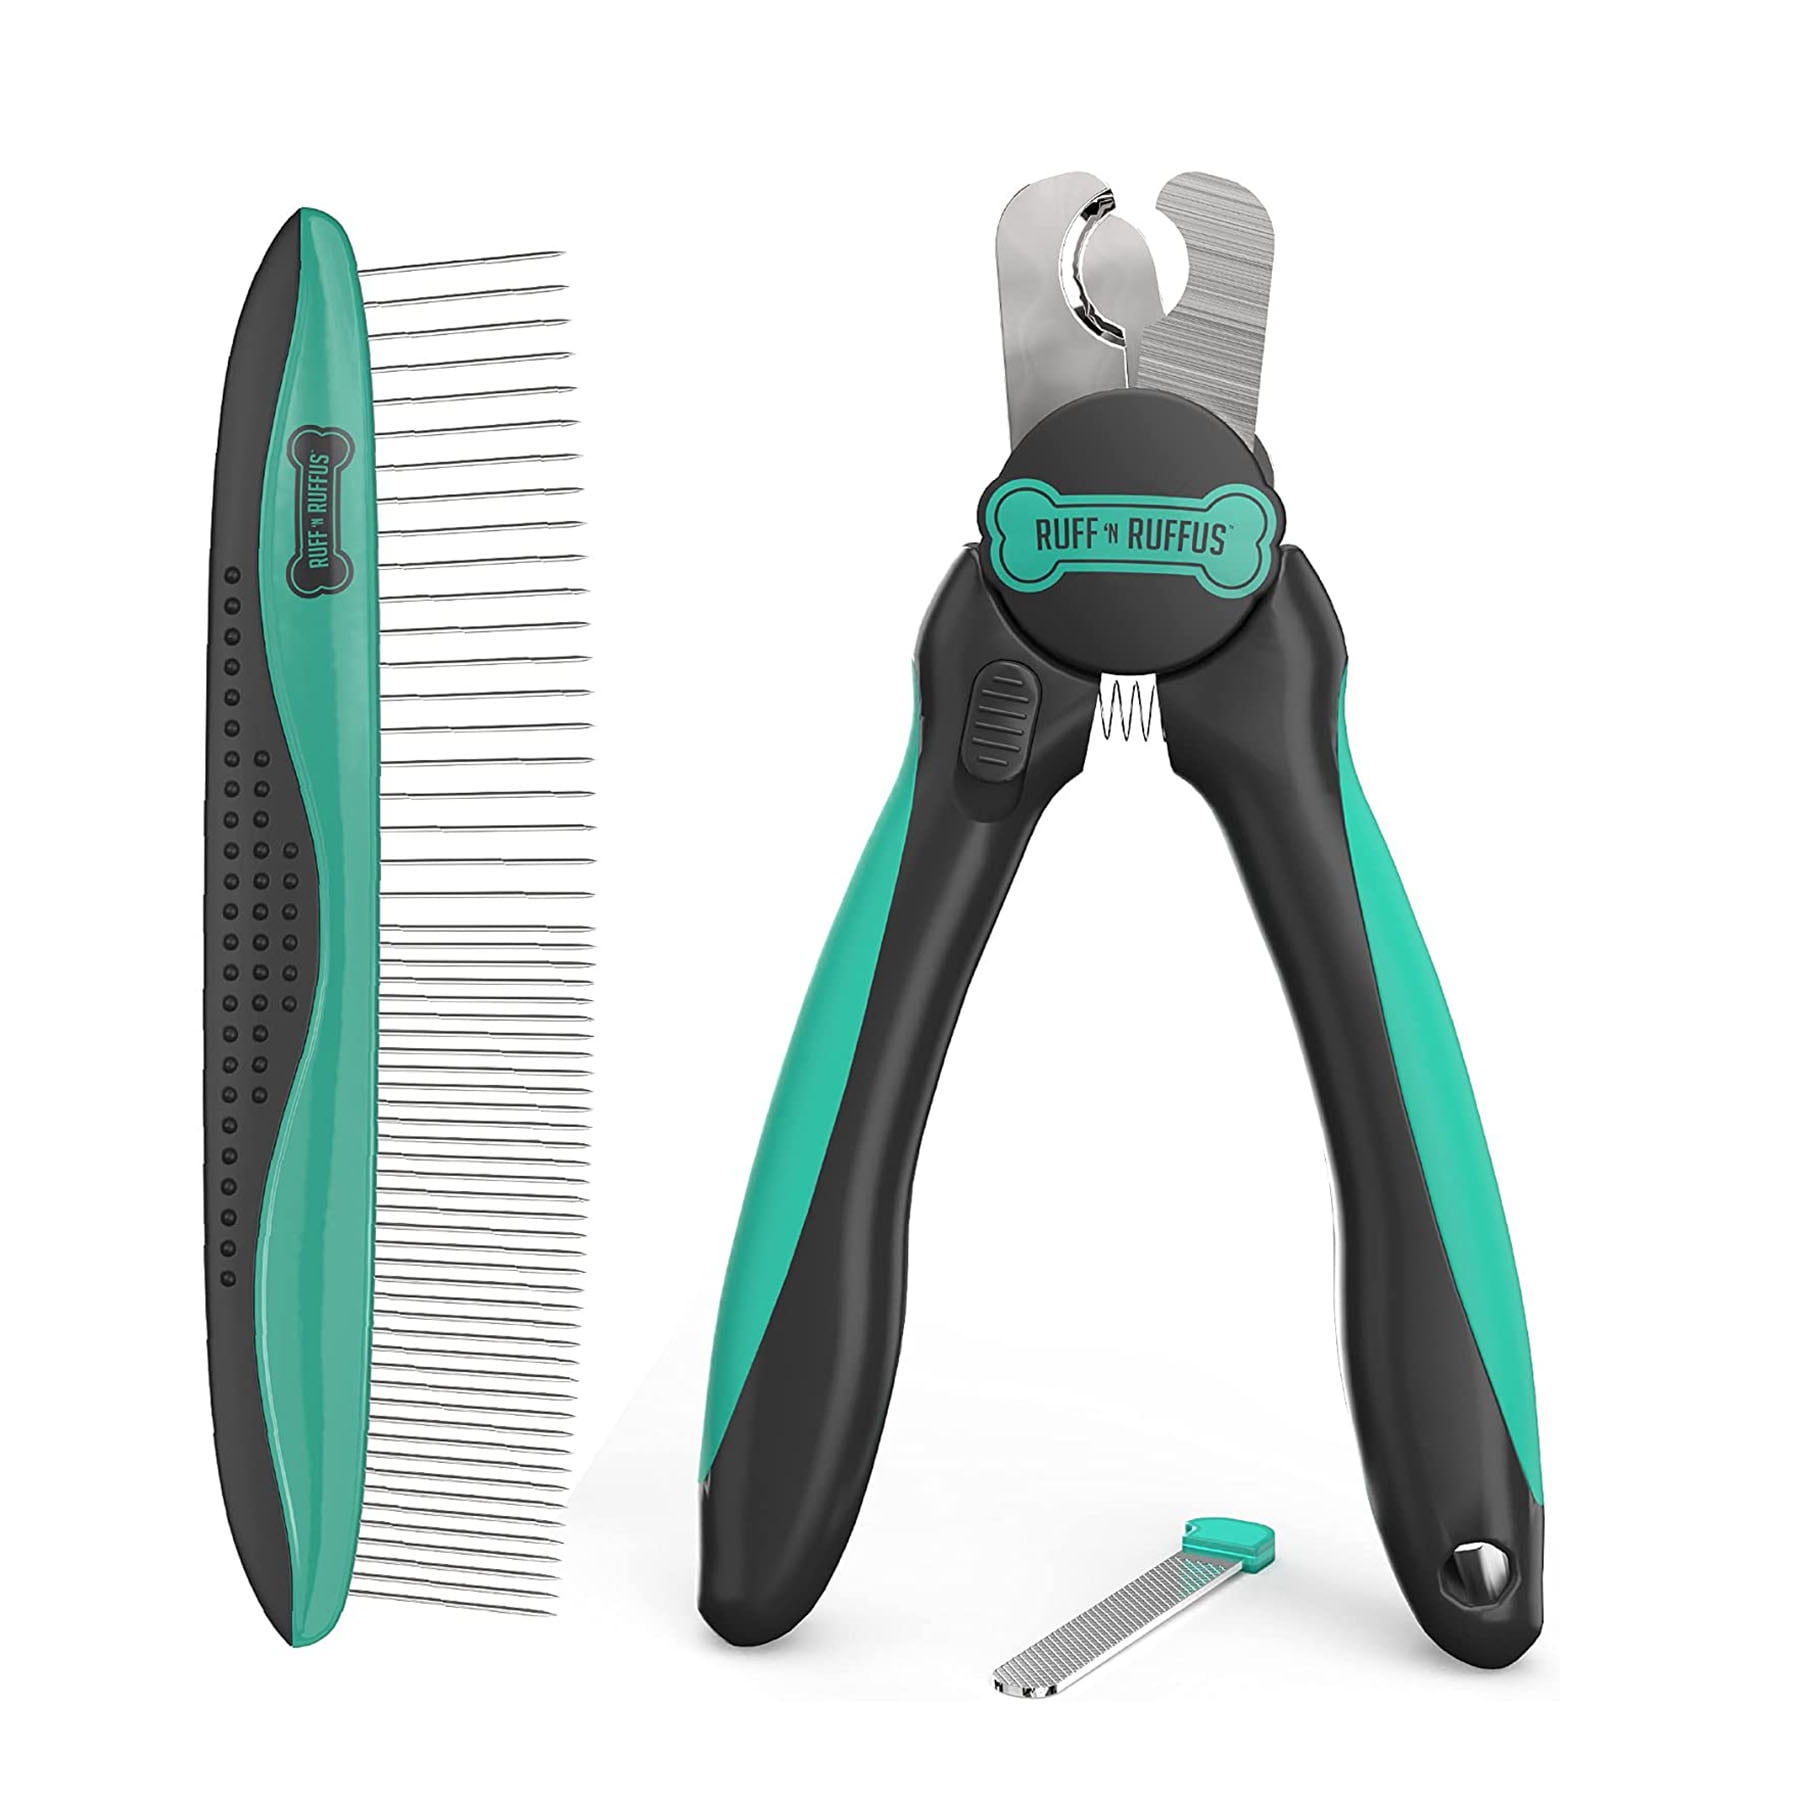 Ruff n Ruffus Professional Grade Pet Nail Trimmers with Pet Comb and Integrated Nail File Safety Guard 6d66d36b 1238 475f 9dda 6164dee62559.c47760111f0912819572f63f9438a7f6